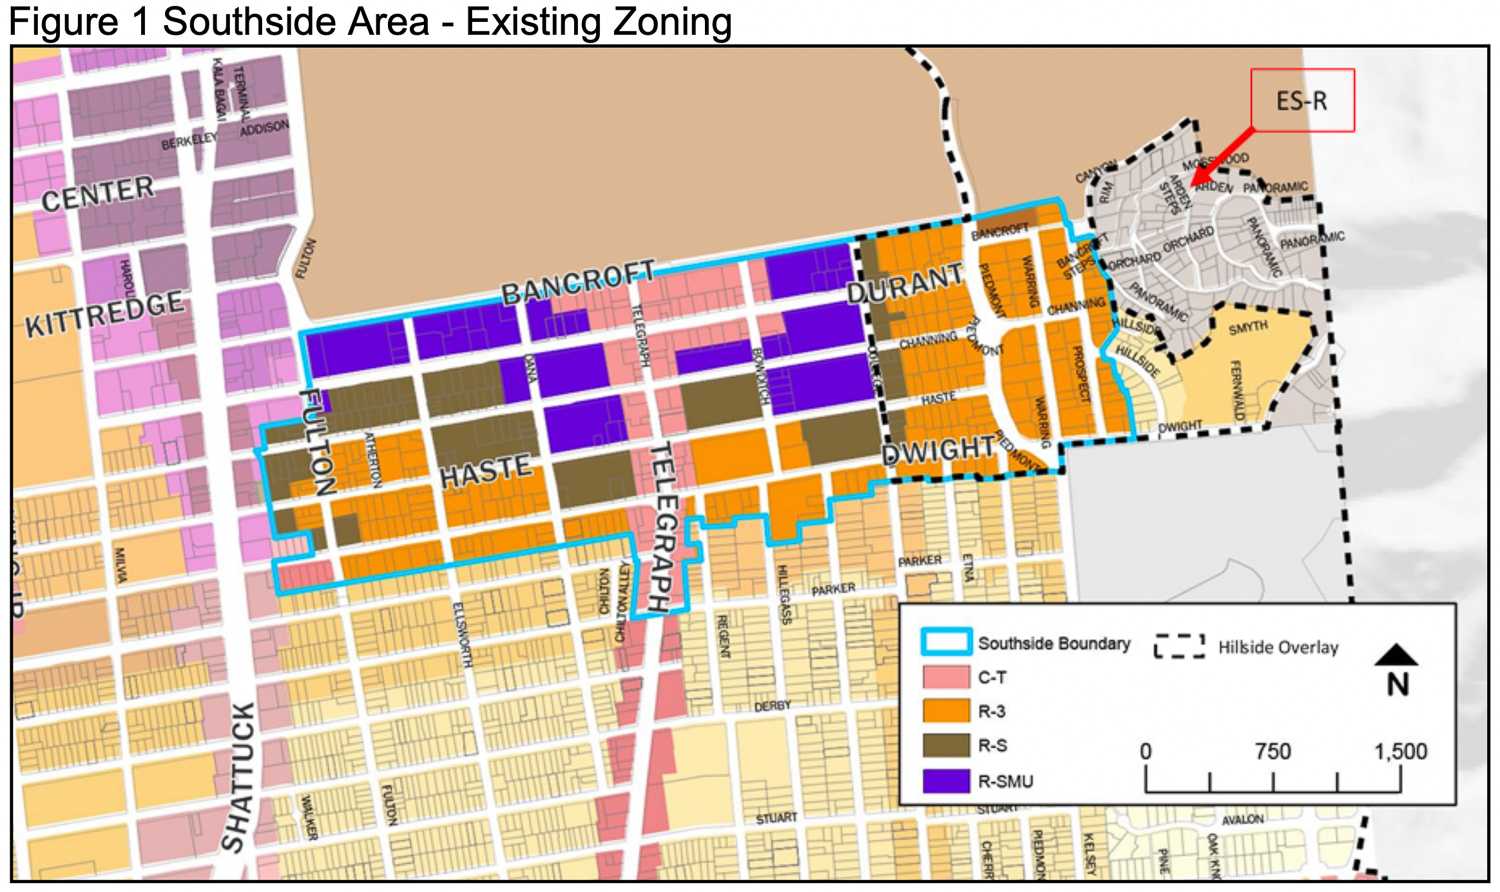 Southside existing zoning map, image from City Council documents